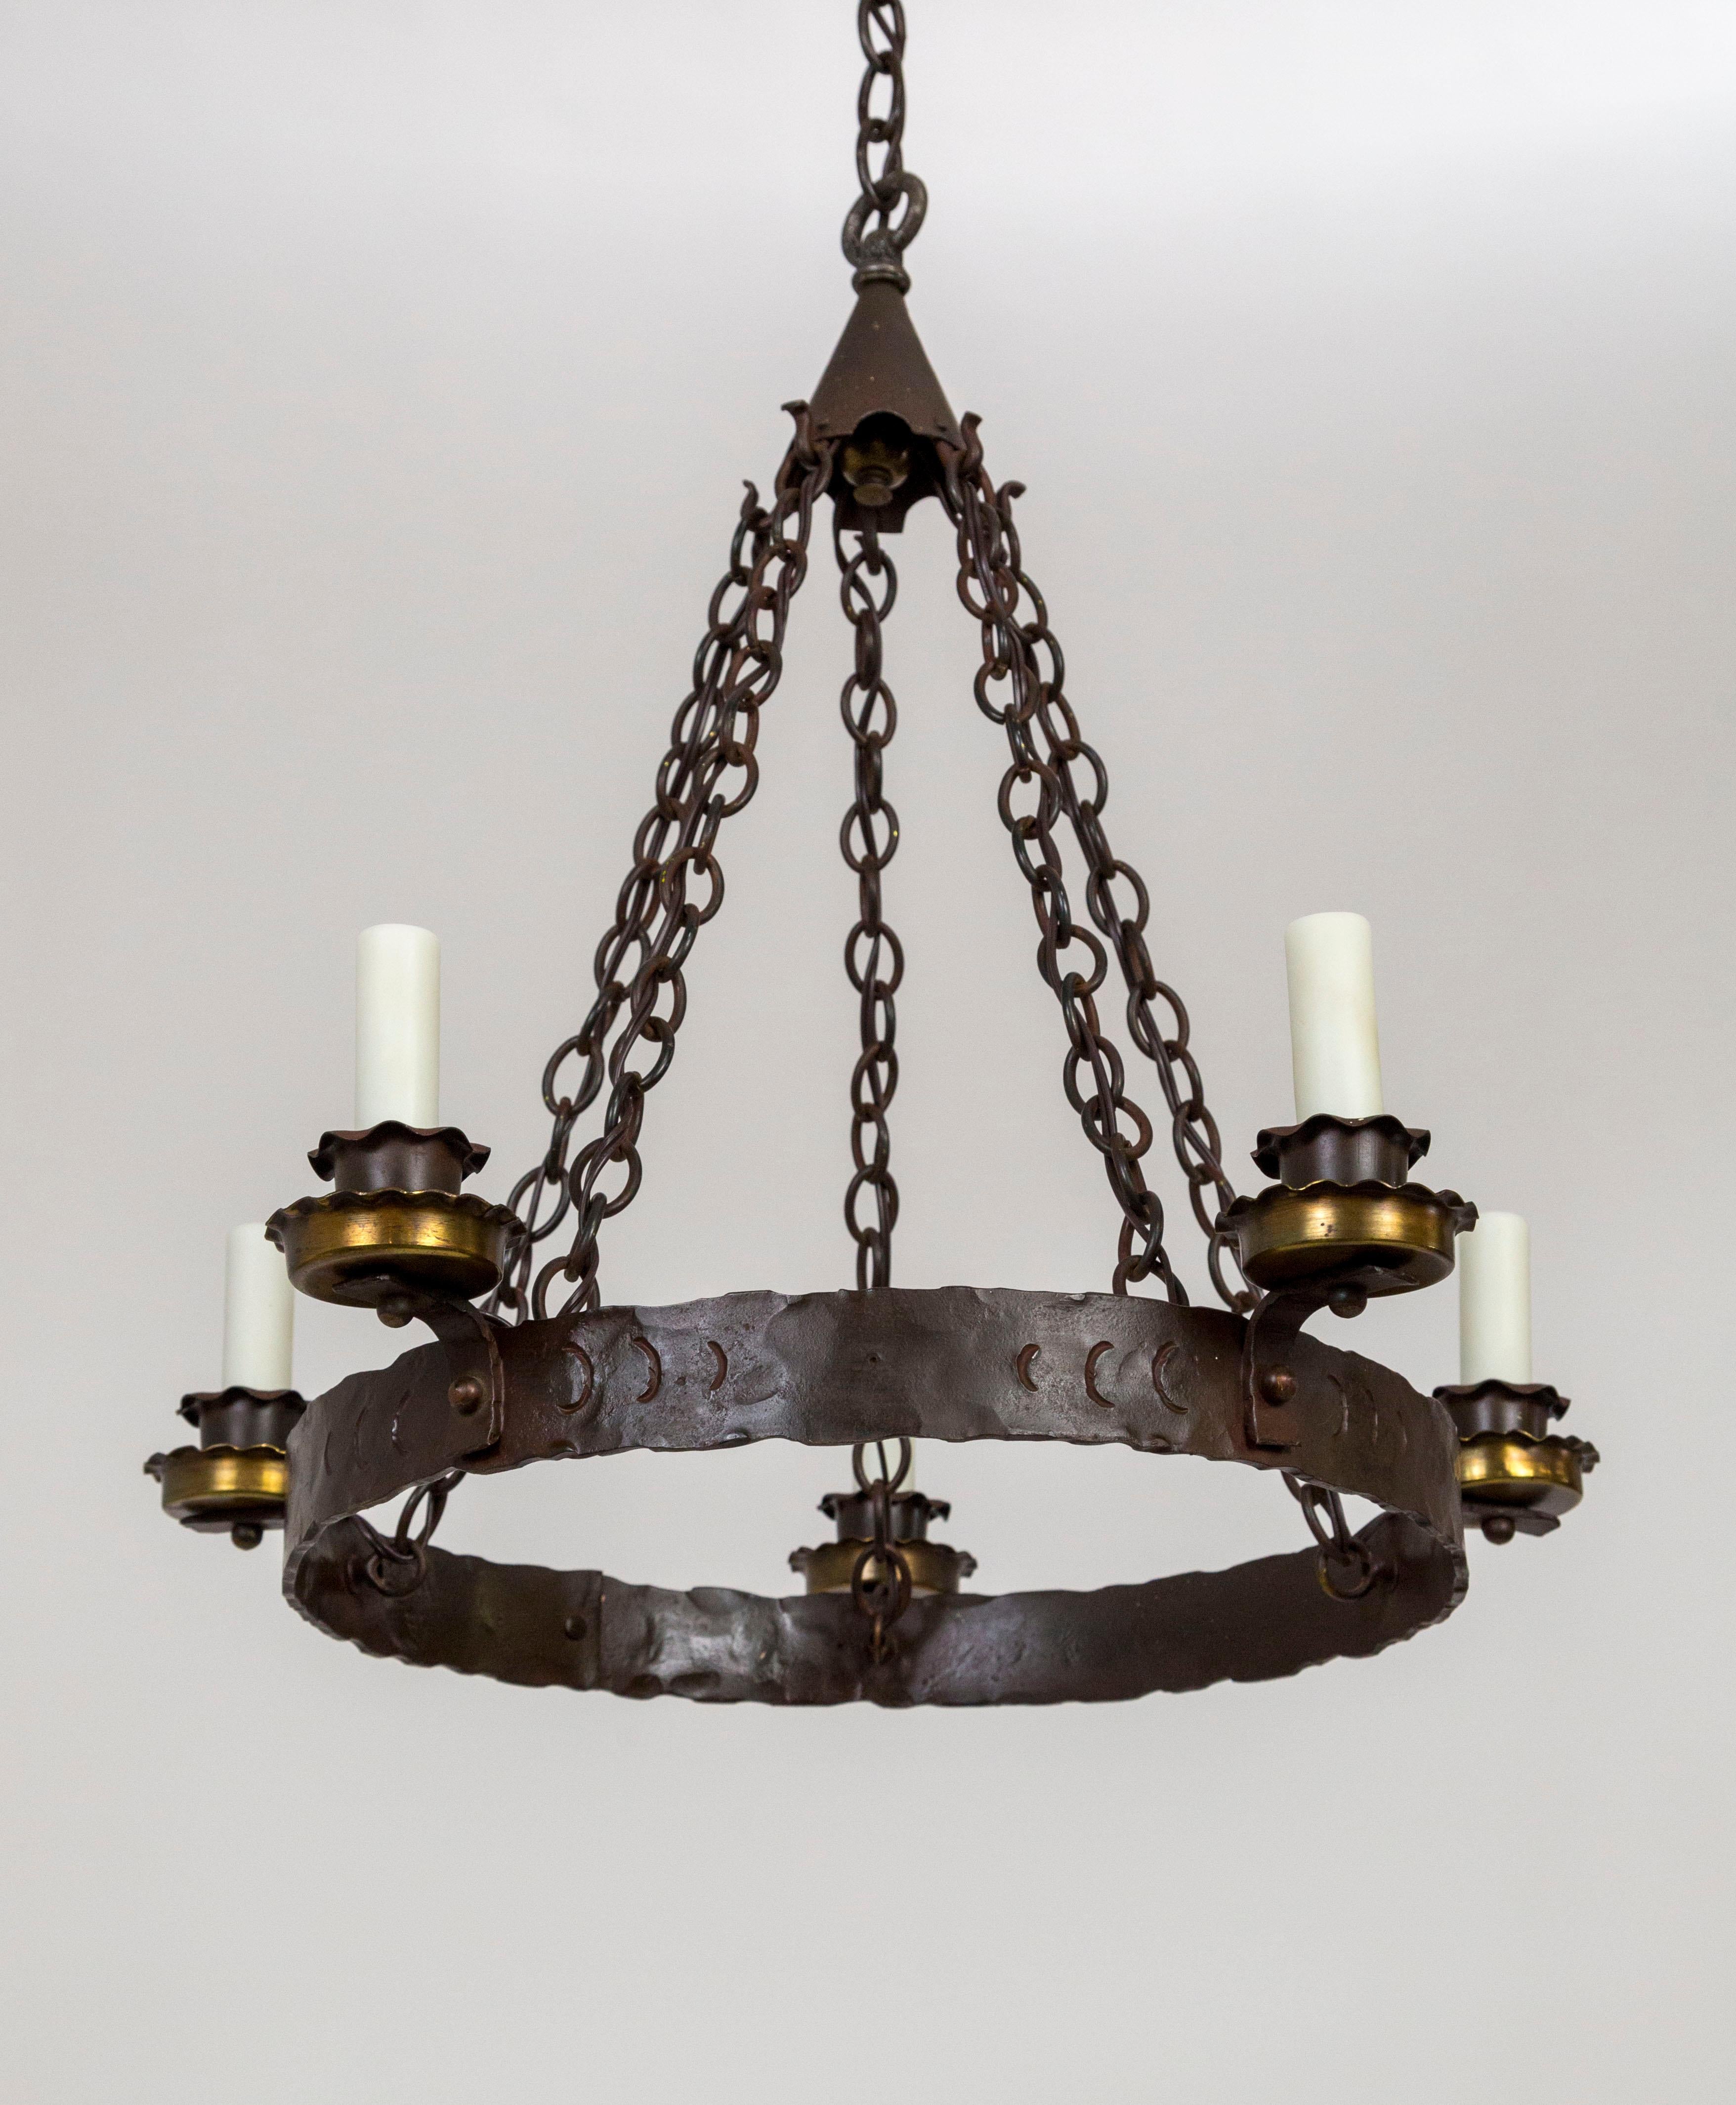 Brass Rustic Medieval Style Wrought Iron Chandelier